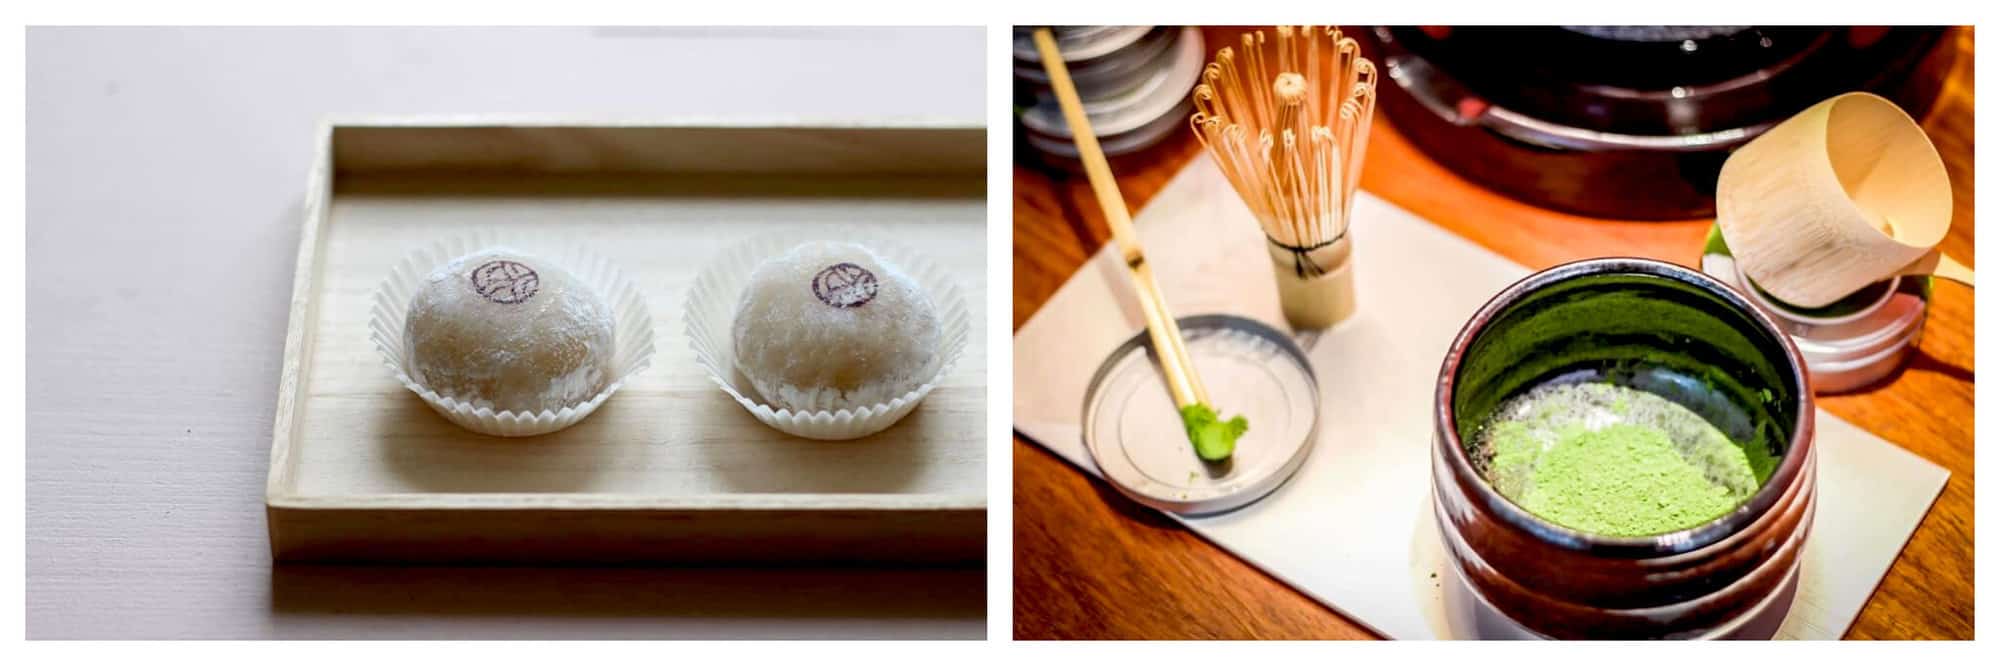 Left: two Japanese mochi desserts on a wooden tray. Right: a cup filled with green matcha tea on the right and a wooden matcha stirring tool on the left.